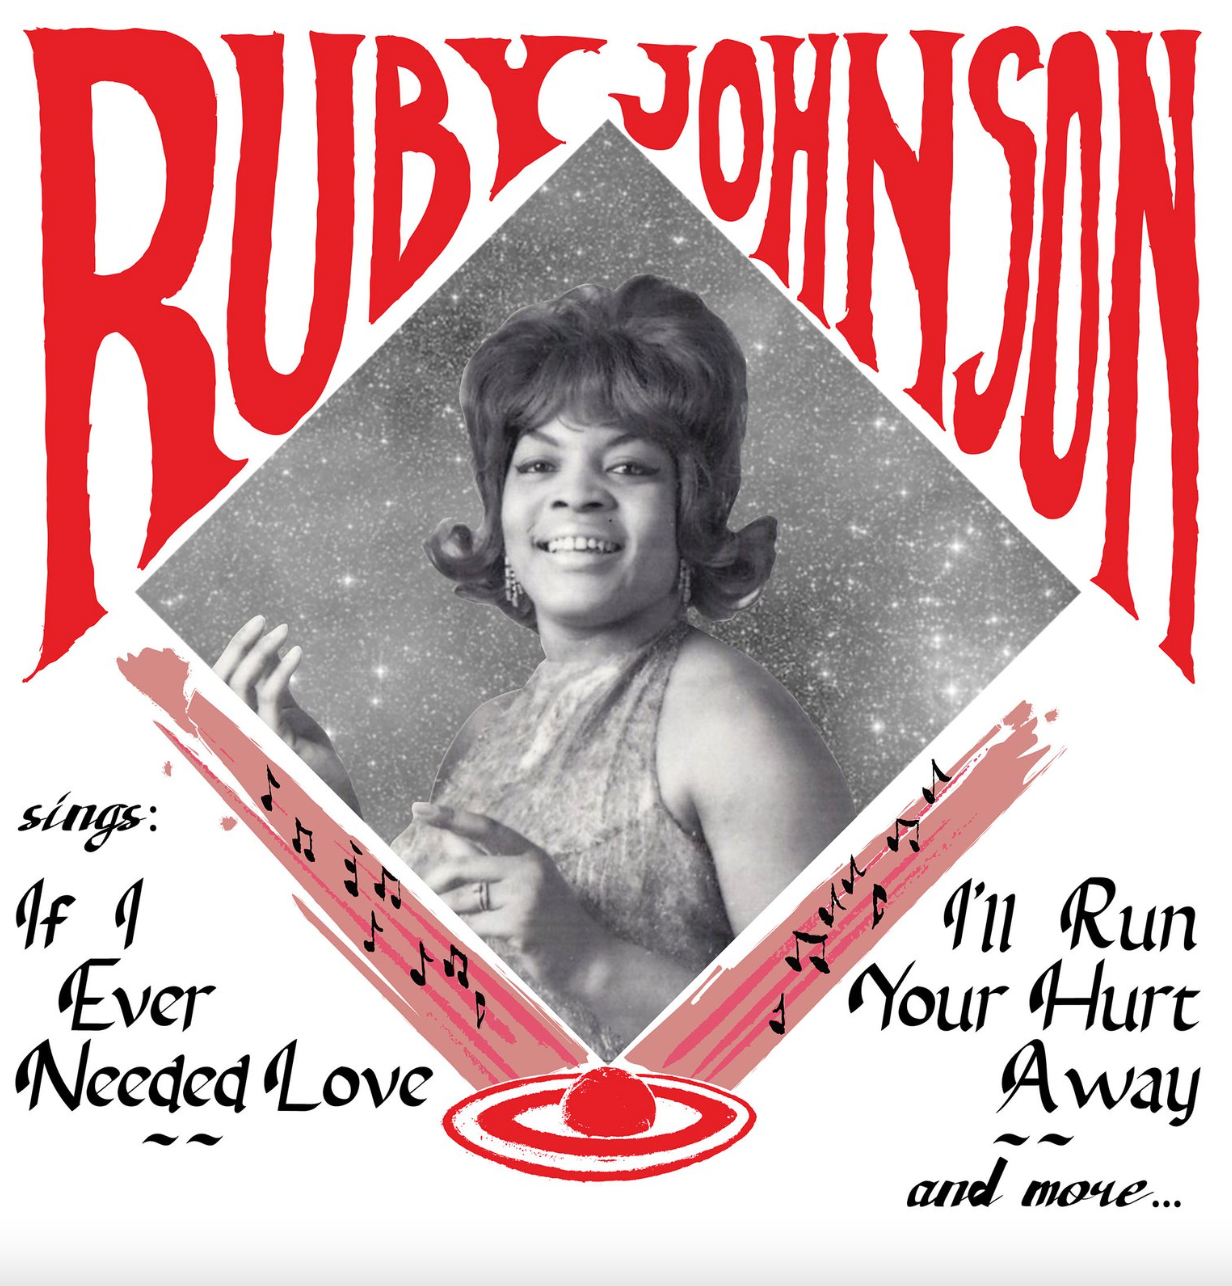 Ruby Johnson  "If I Ever Needed Love"  1xLP [Mississippi Records]